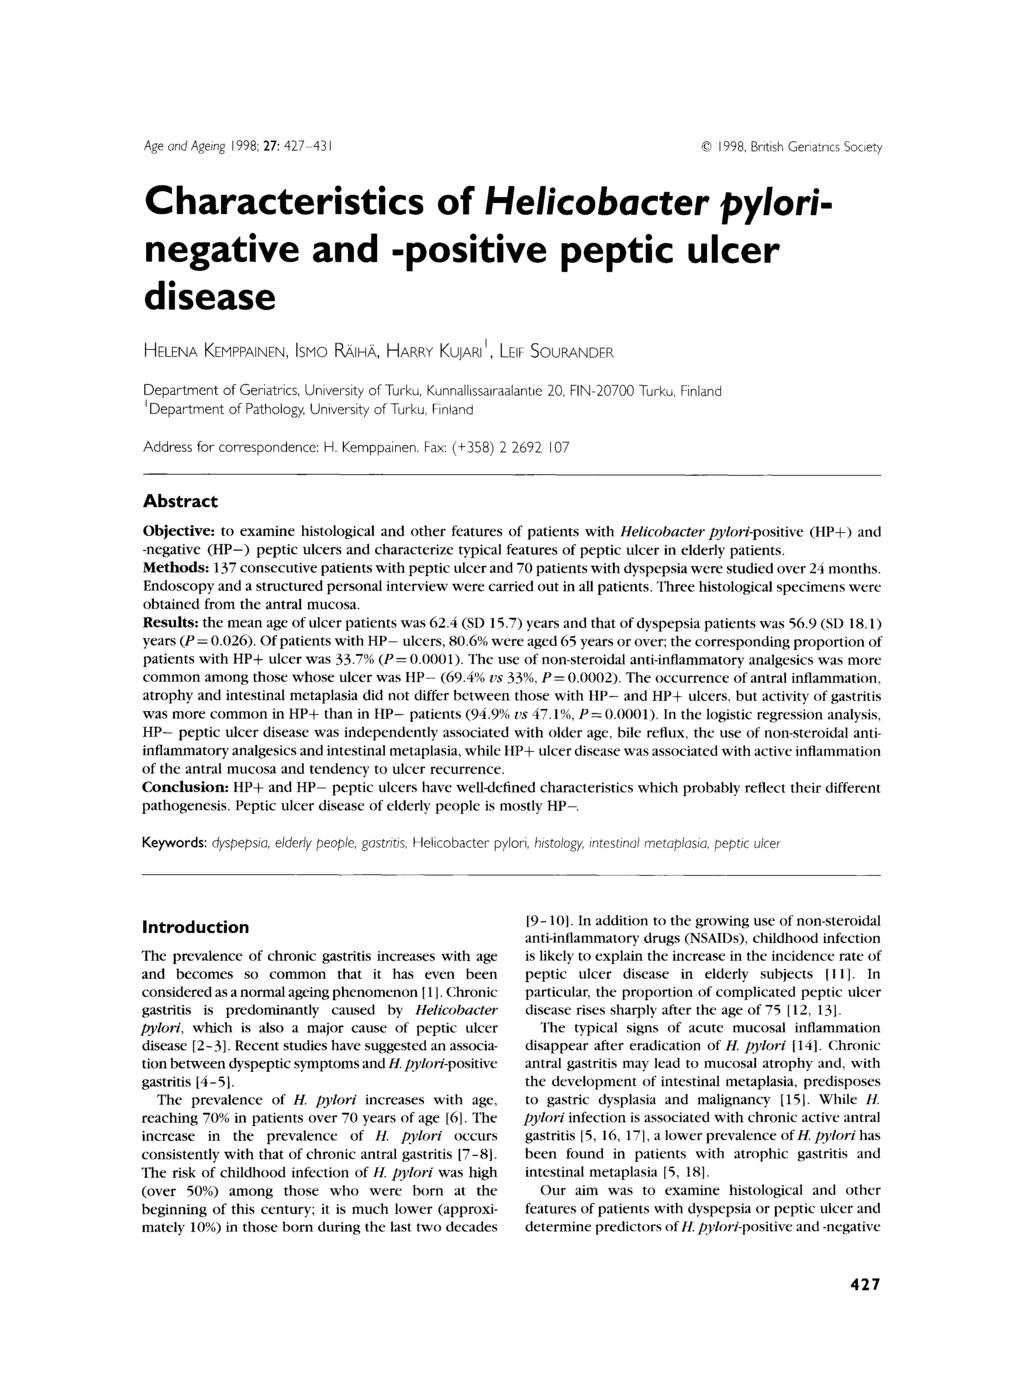 Age and Ageing 1998; 27: 427-43 I 1998, British Geriatrics Society Characteristics of Helicobacter pylorinegative and -positive peptic ulcer disease HELENA KEMPPAINEN, ISMO MIHA, HARRY KUJARI 1, LEIF